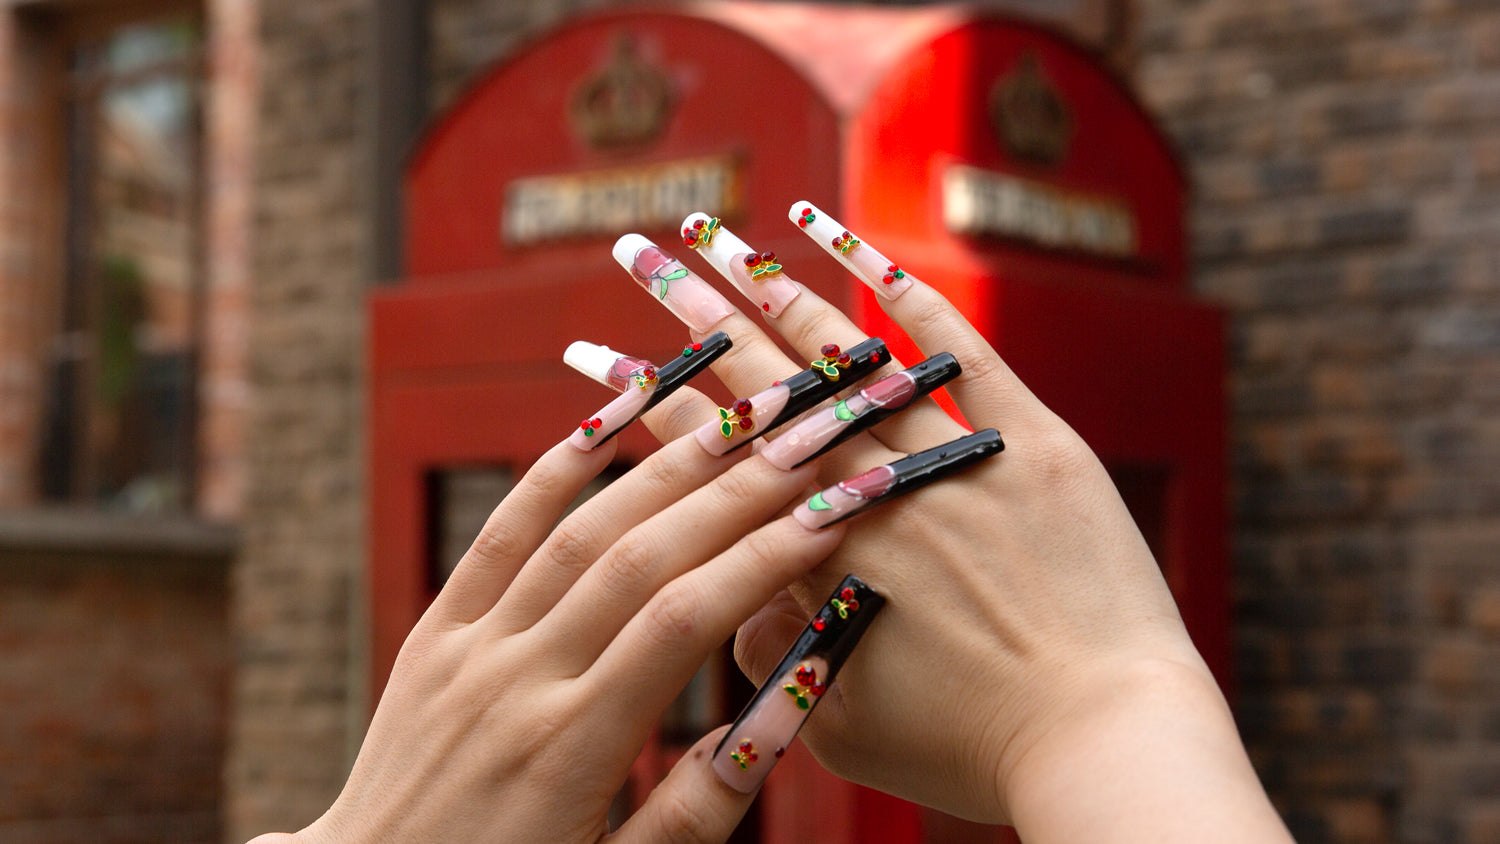 Press-on nails let you express your style.